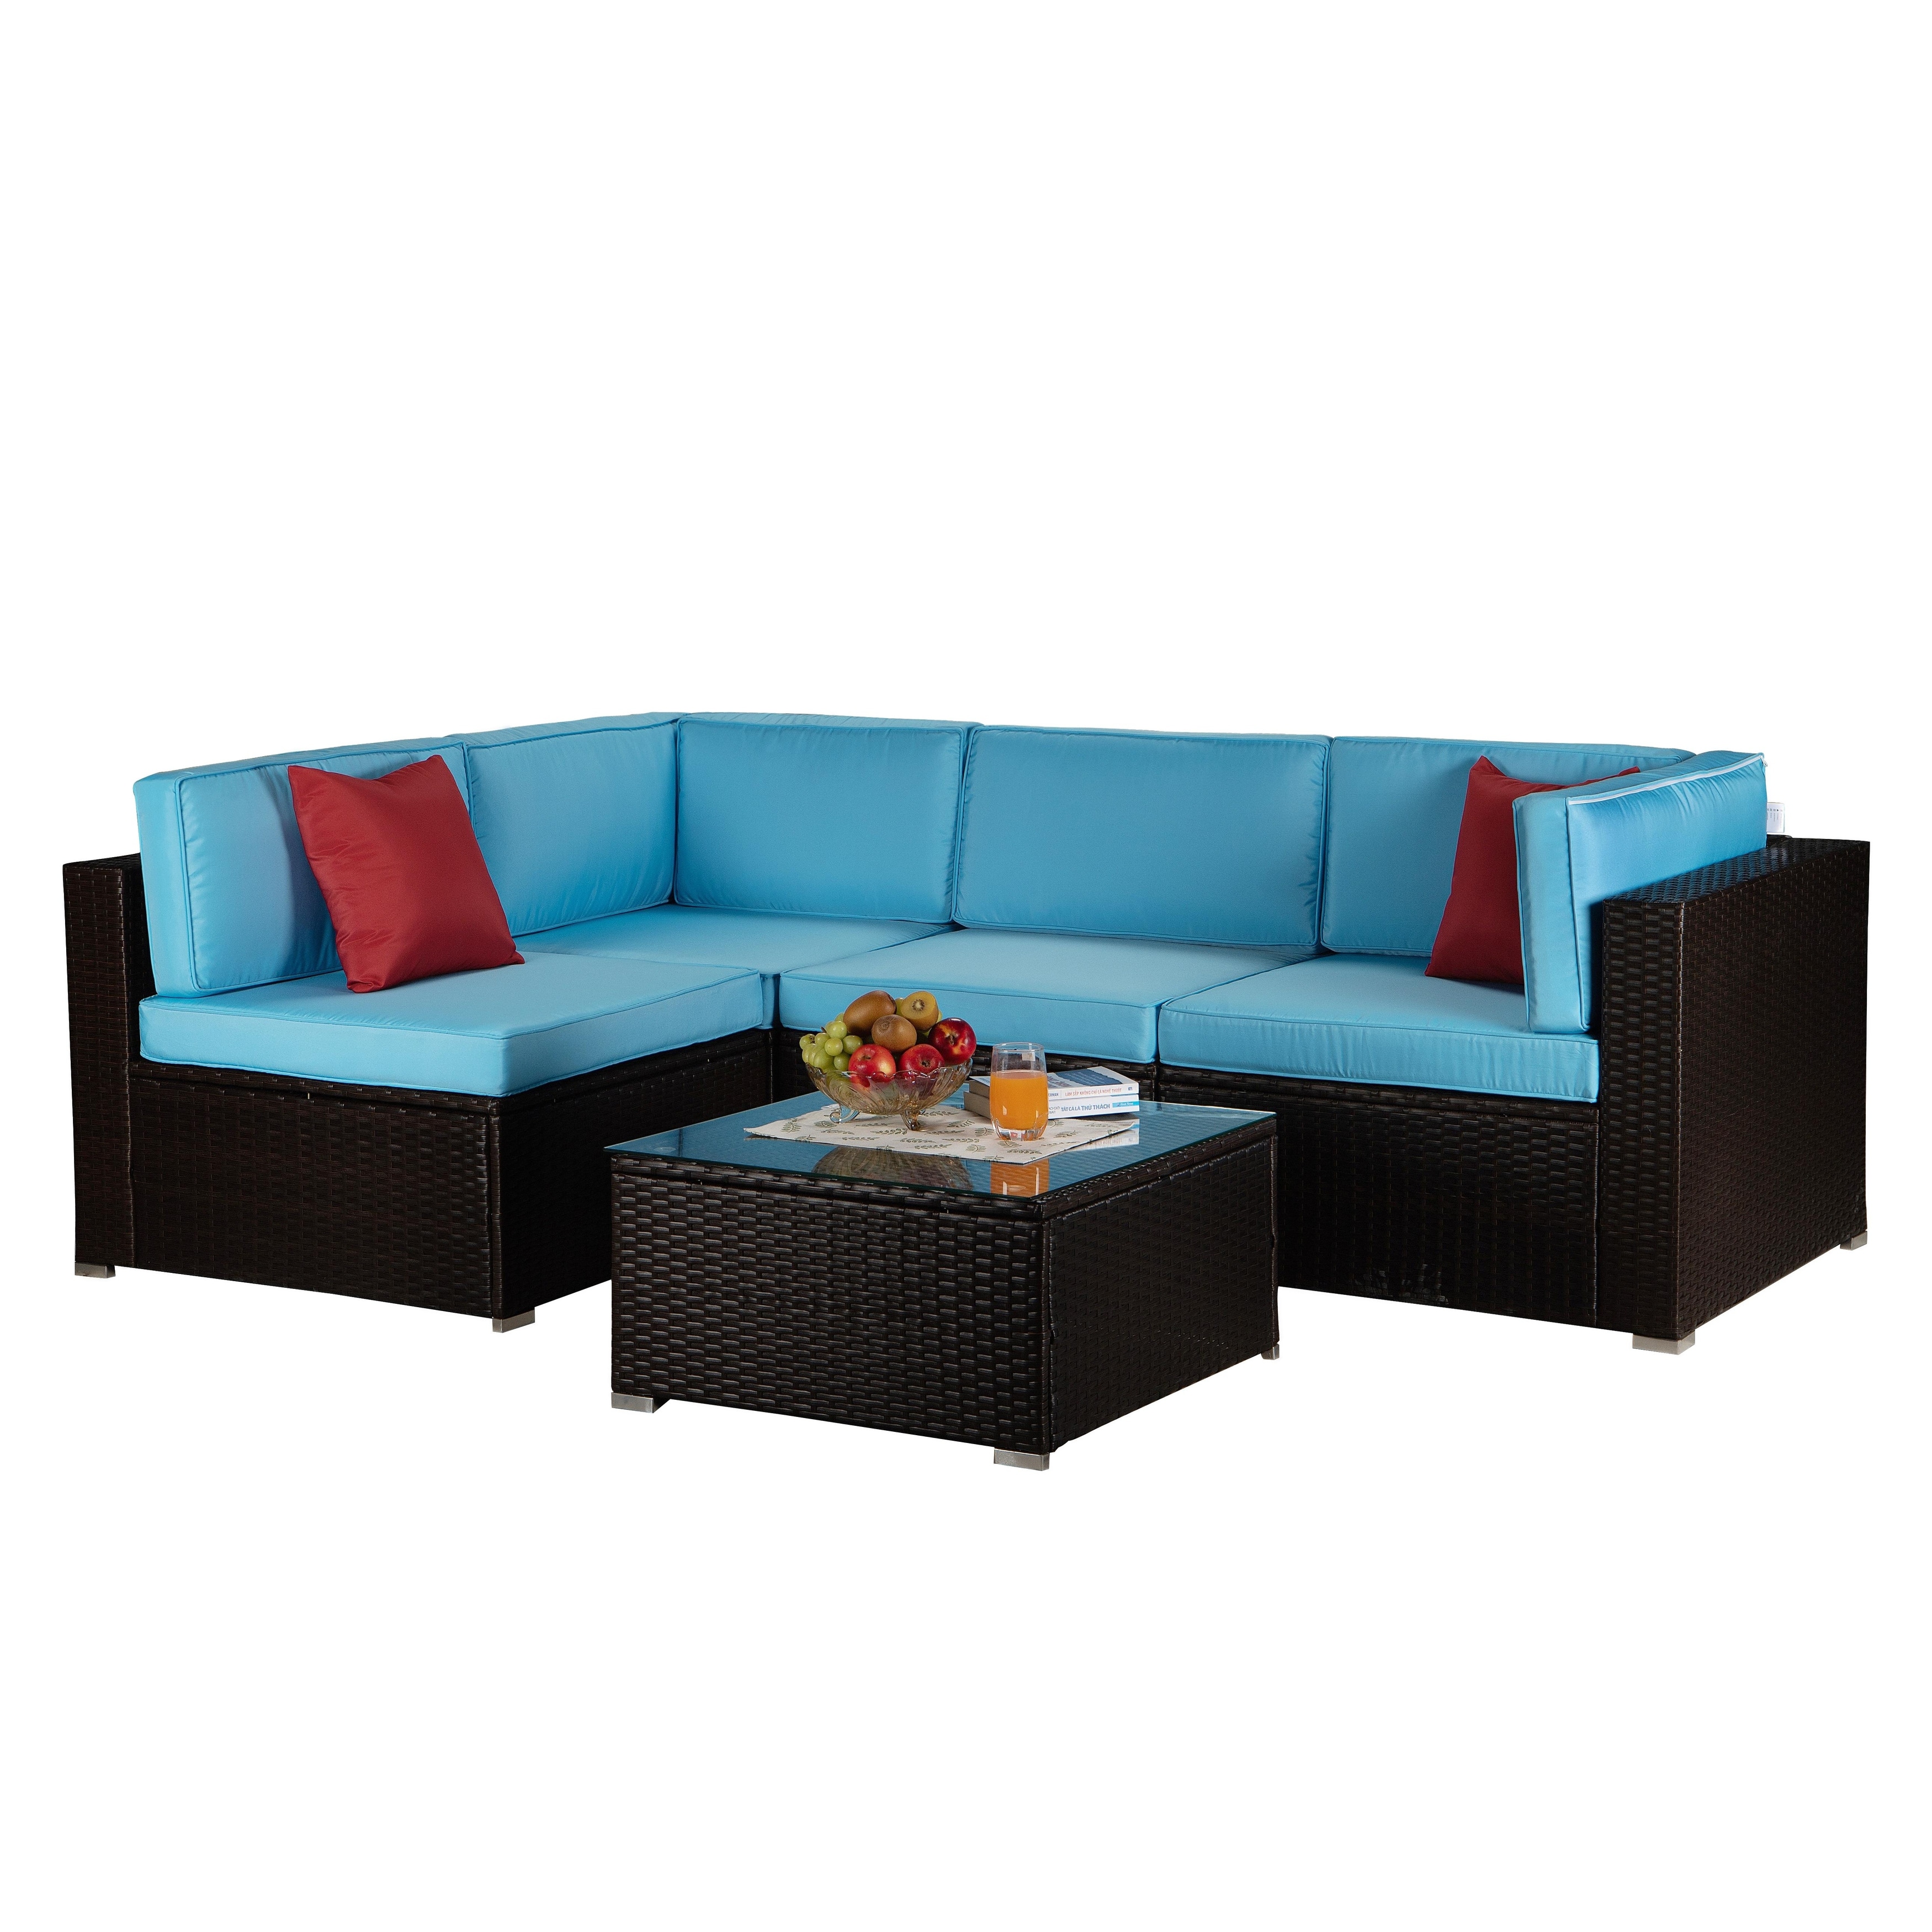 Outdoor Garden Patio Furniture Set Of 5 Brown Pe Rattan Wicker Sectional Blue Upholstered Sofa Set With 2 Red Pillows